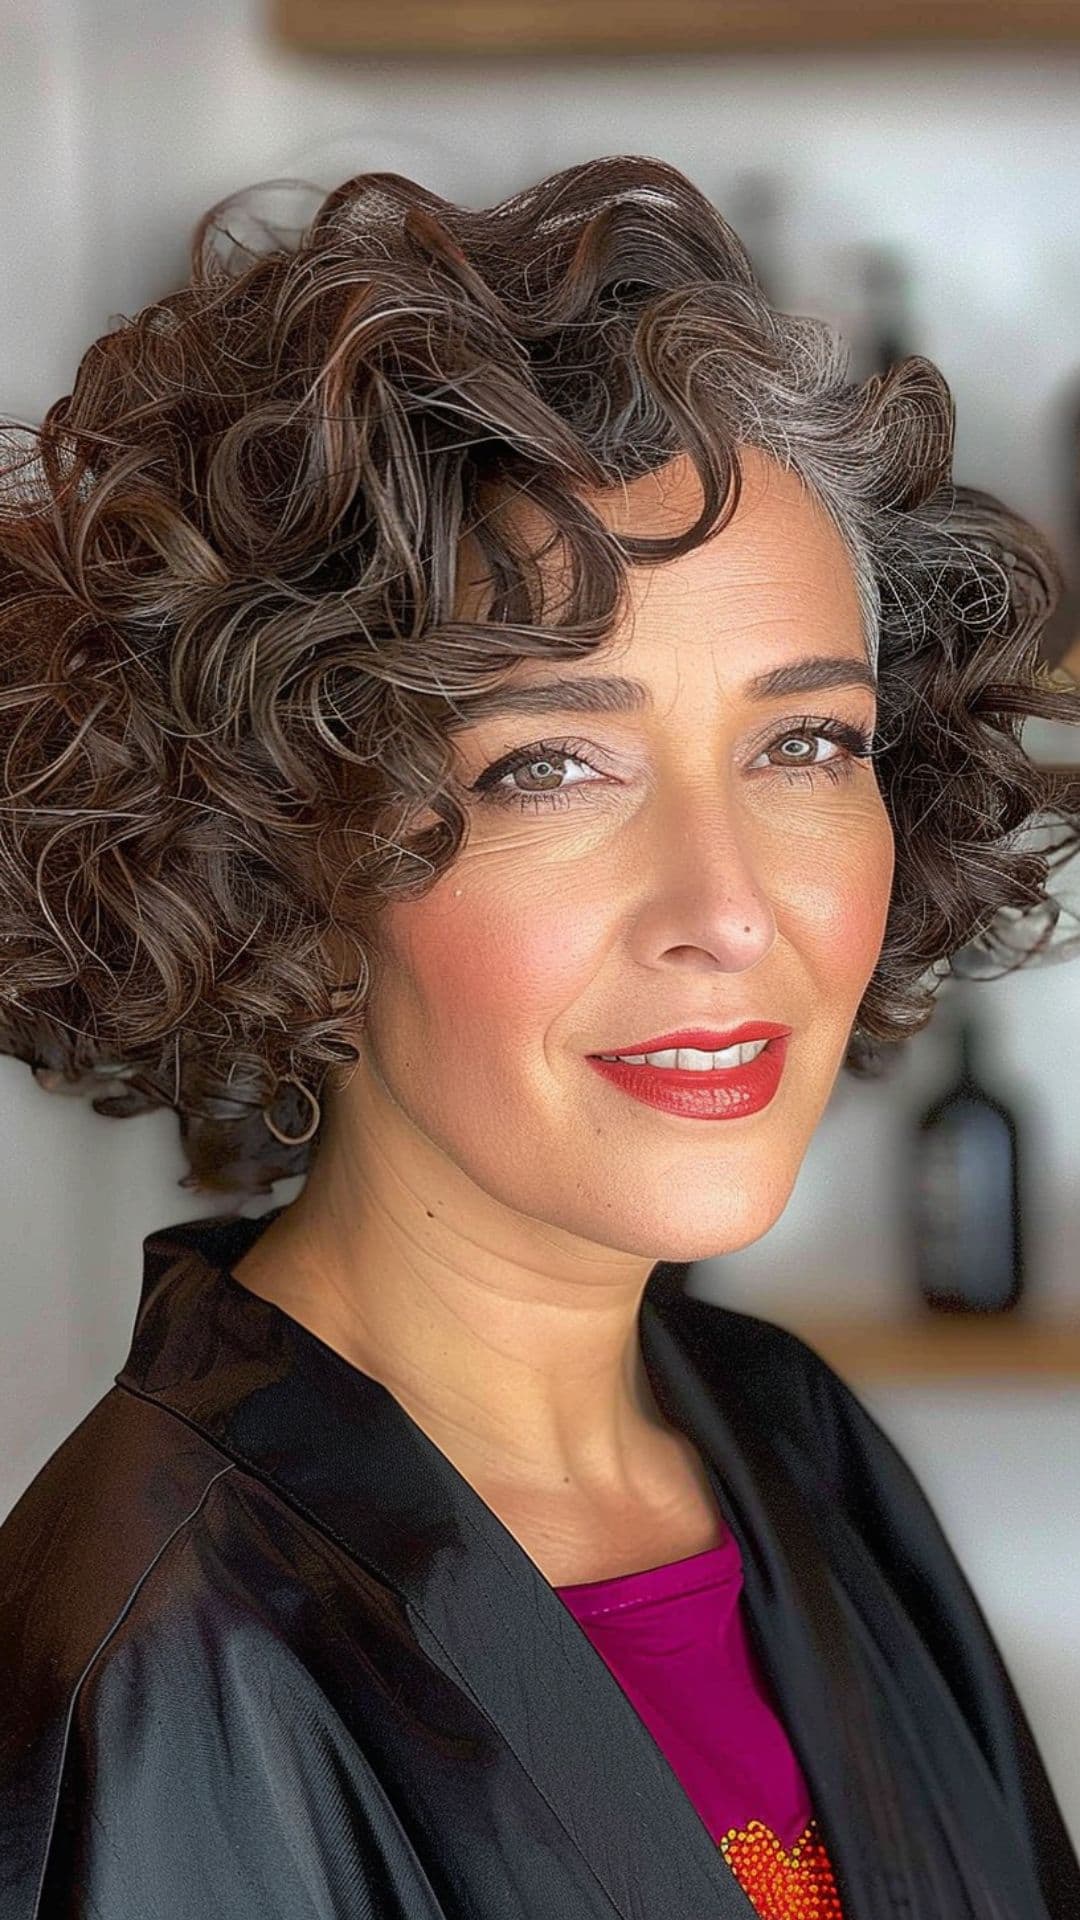 An old woman modelling a curly hair with side part.